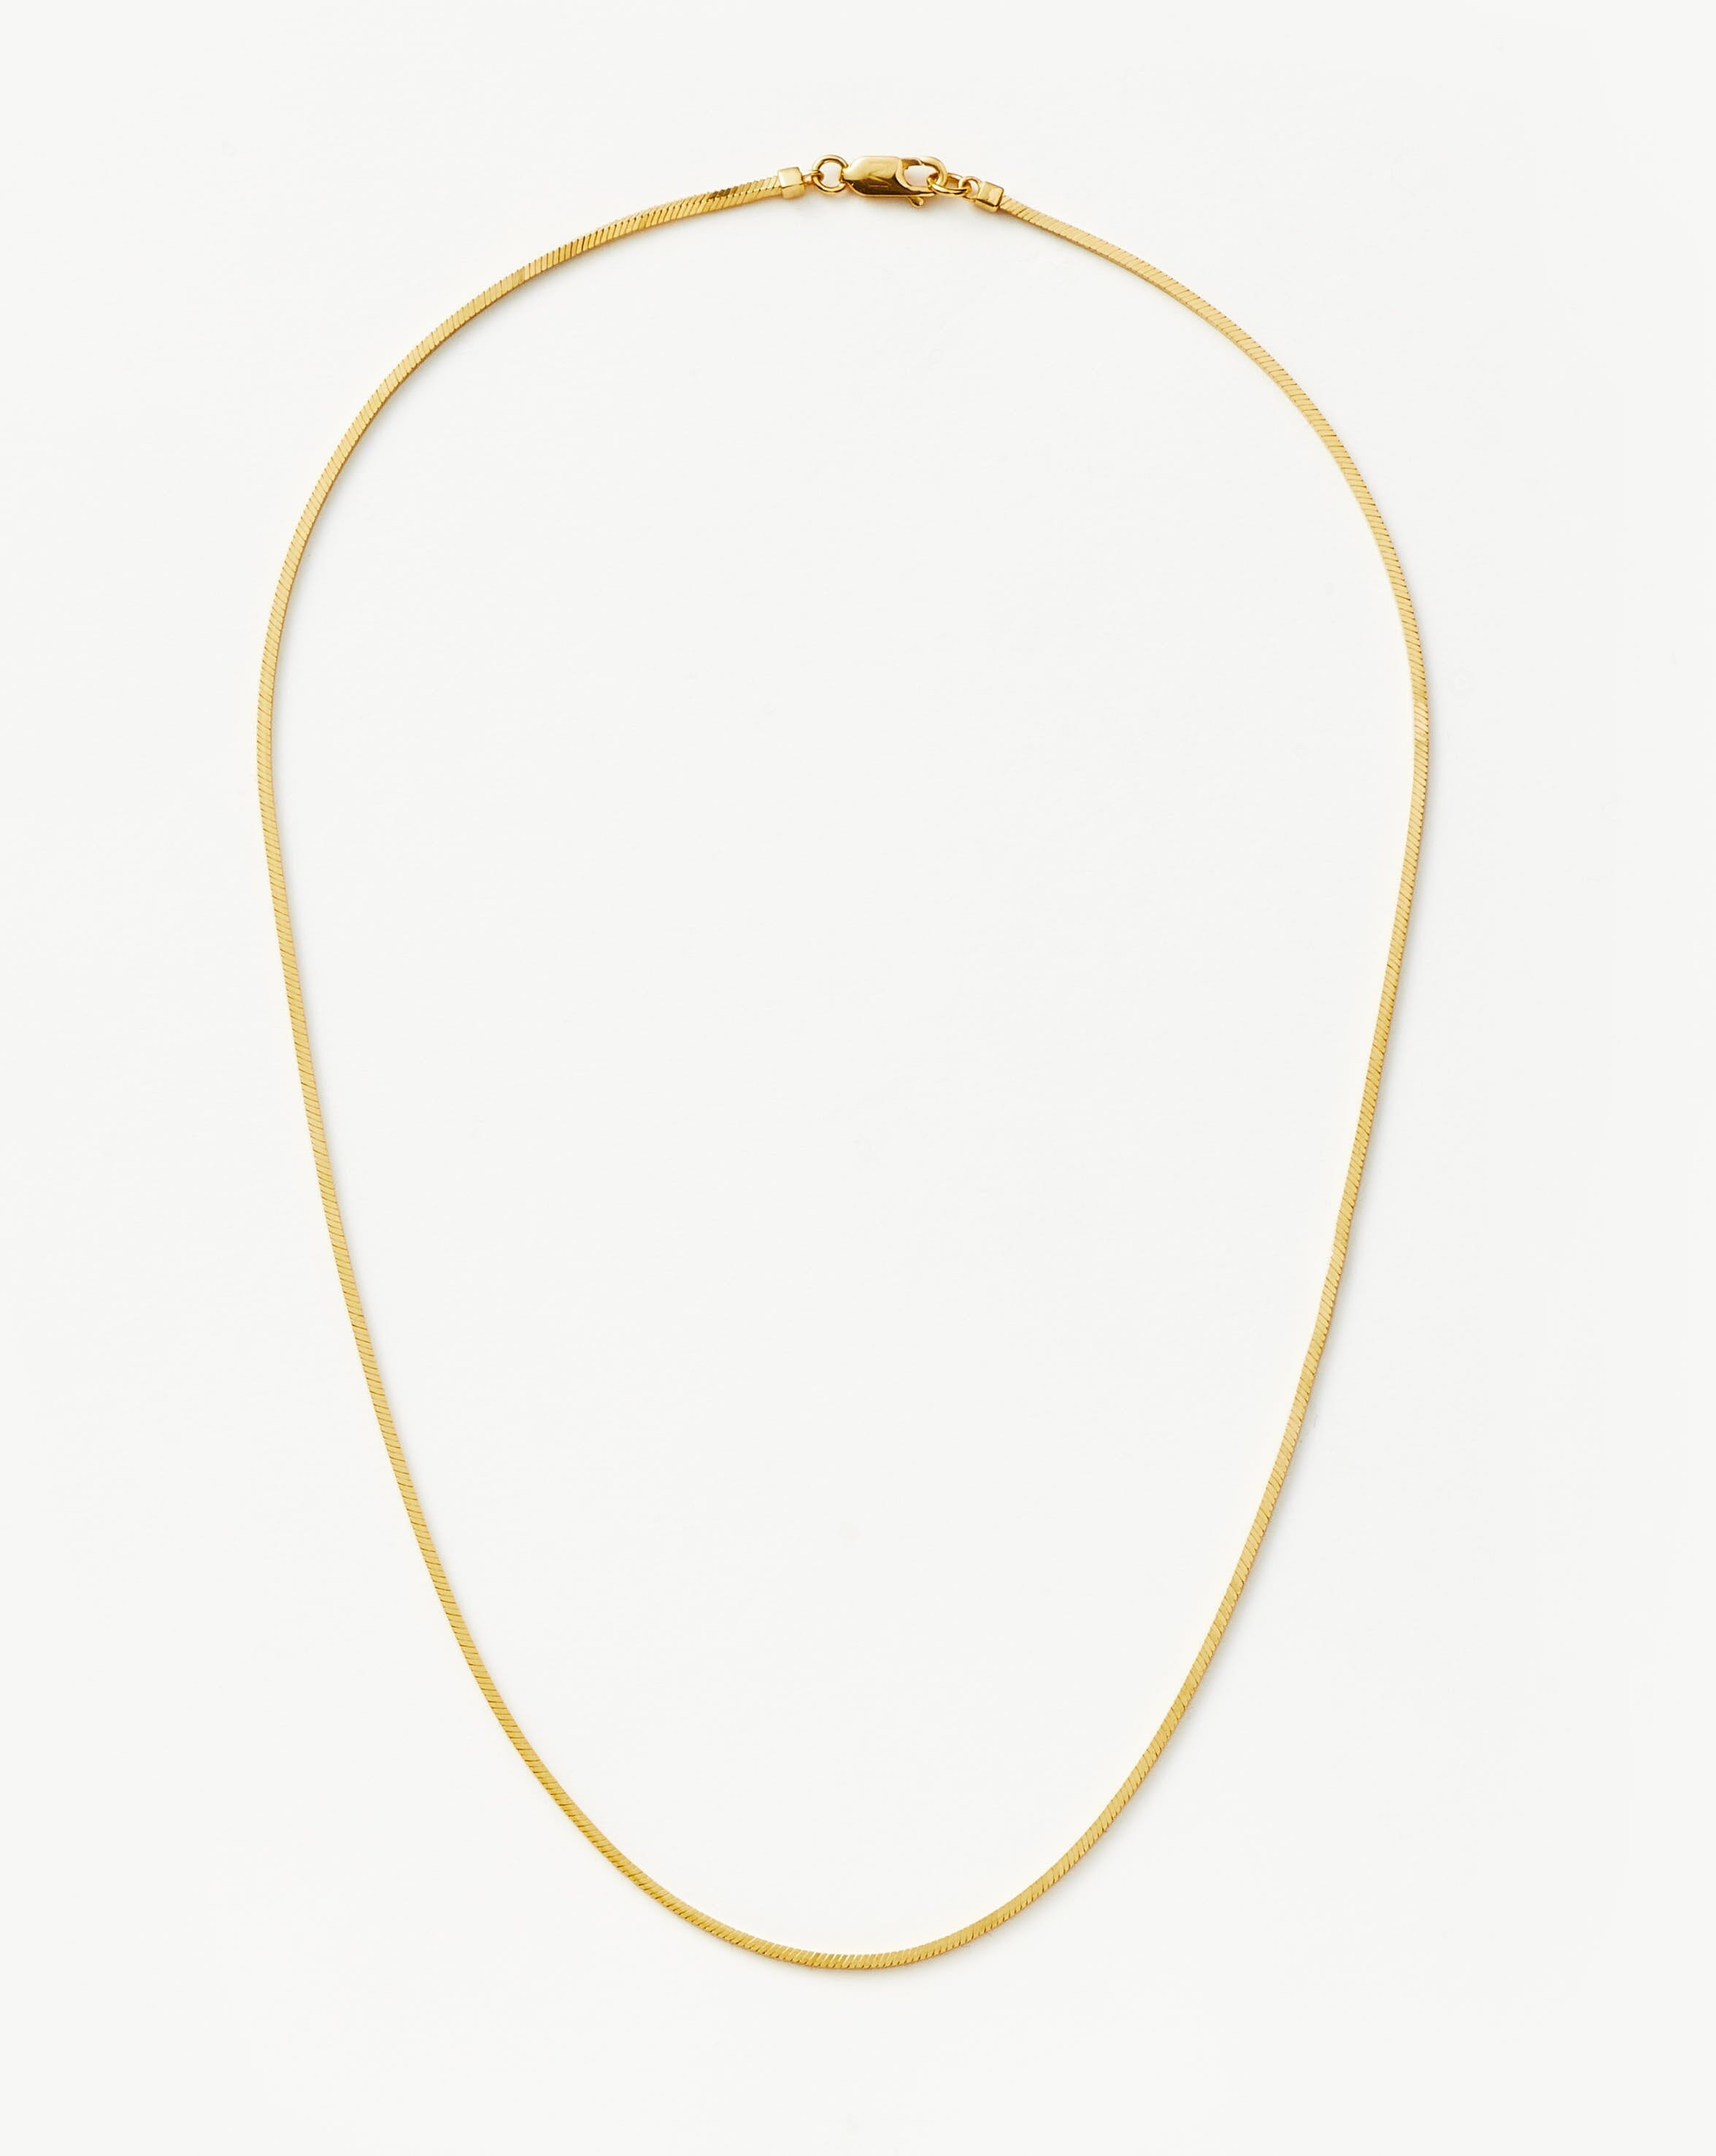 Lucy Williams Medium Square Snake Chain Necklace Necklaces Missoma 